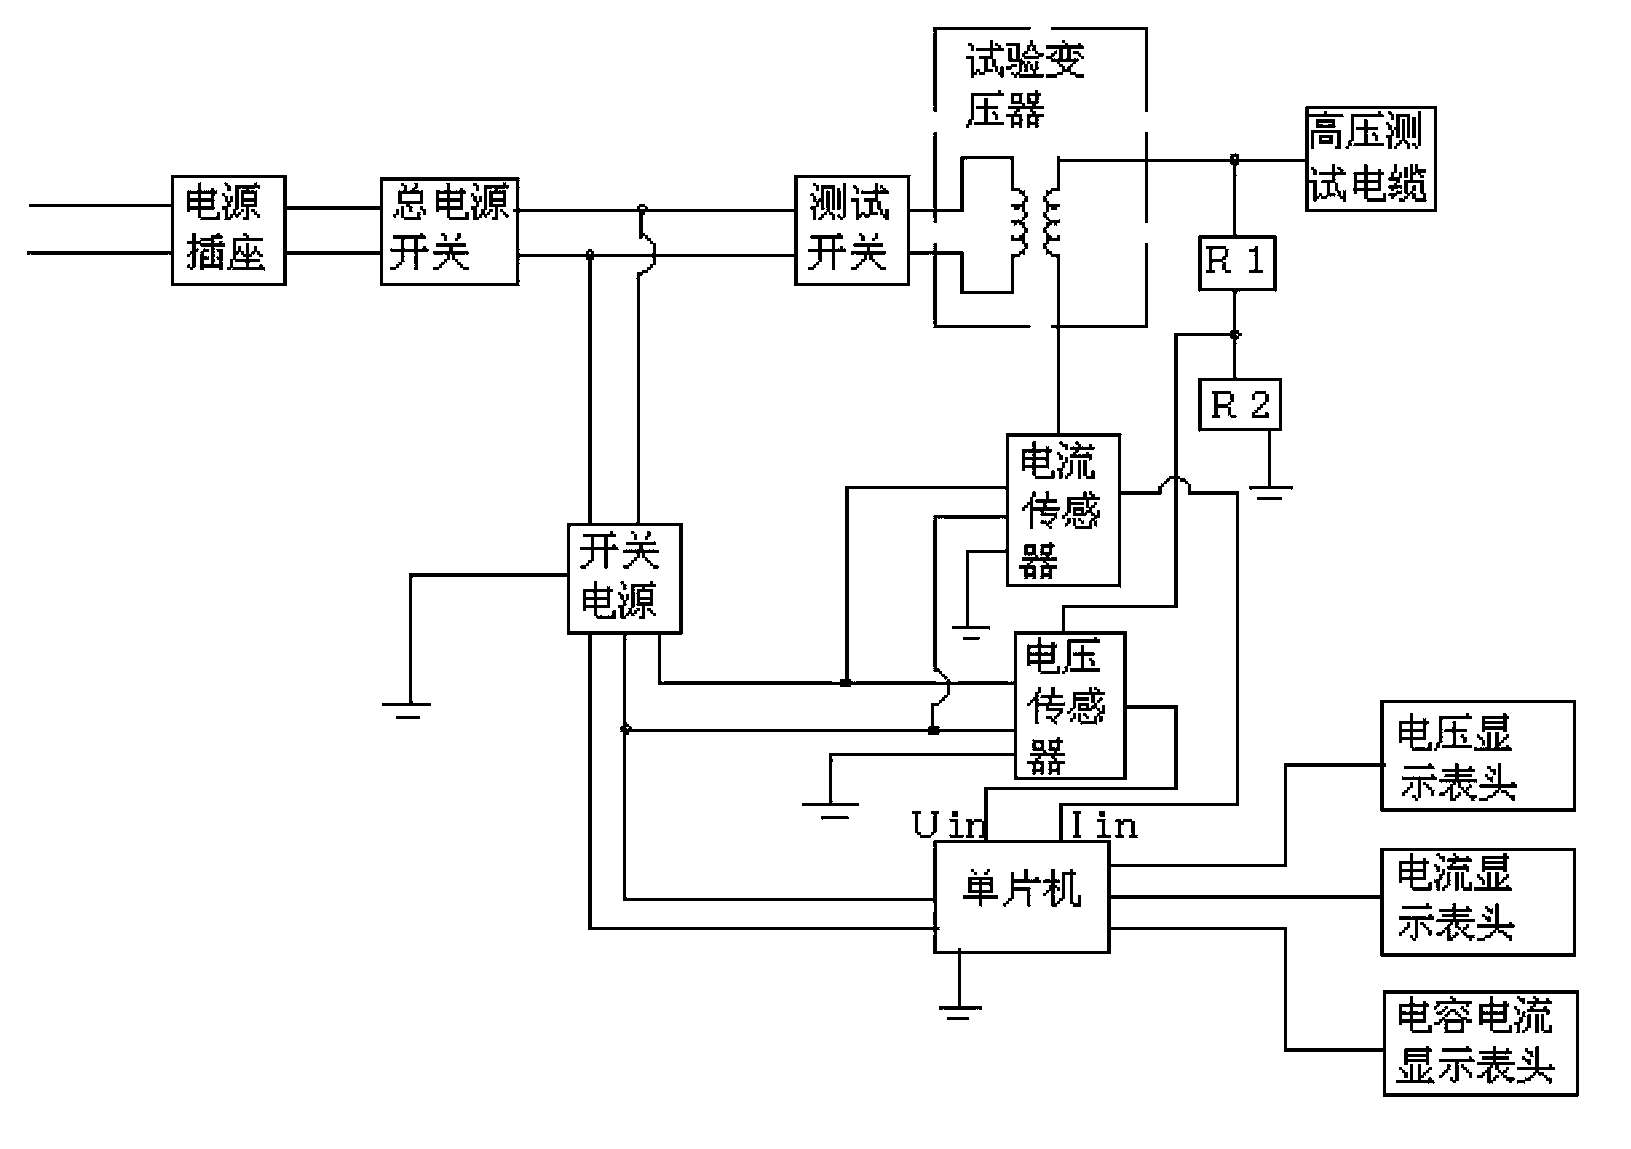 True-root-mean-square capacitive current tester